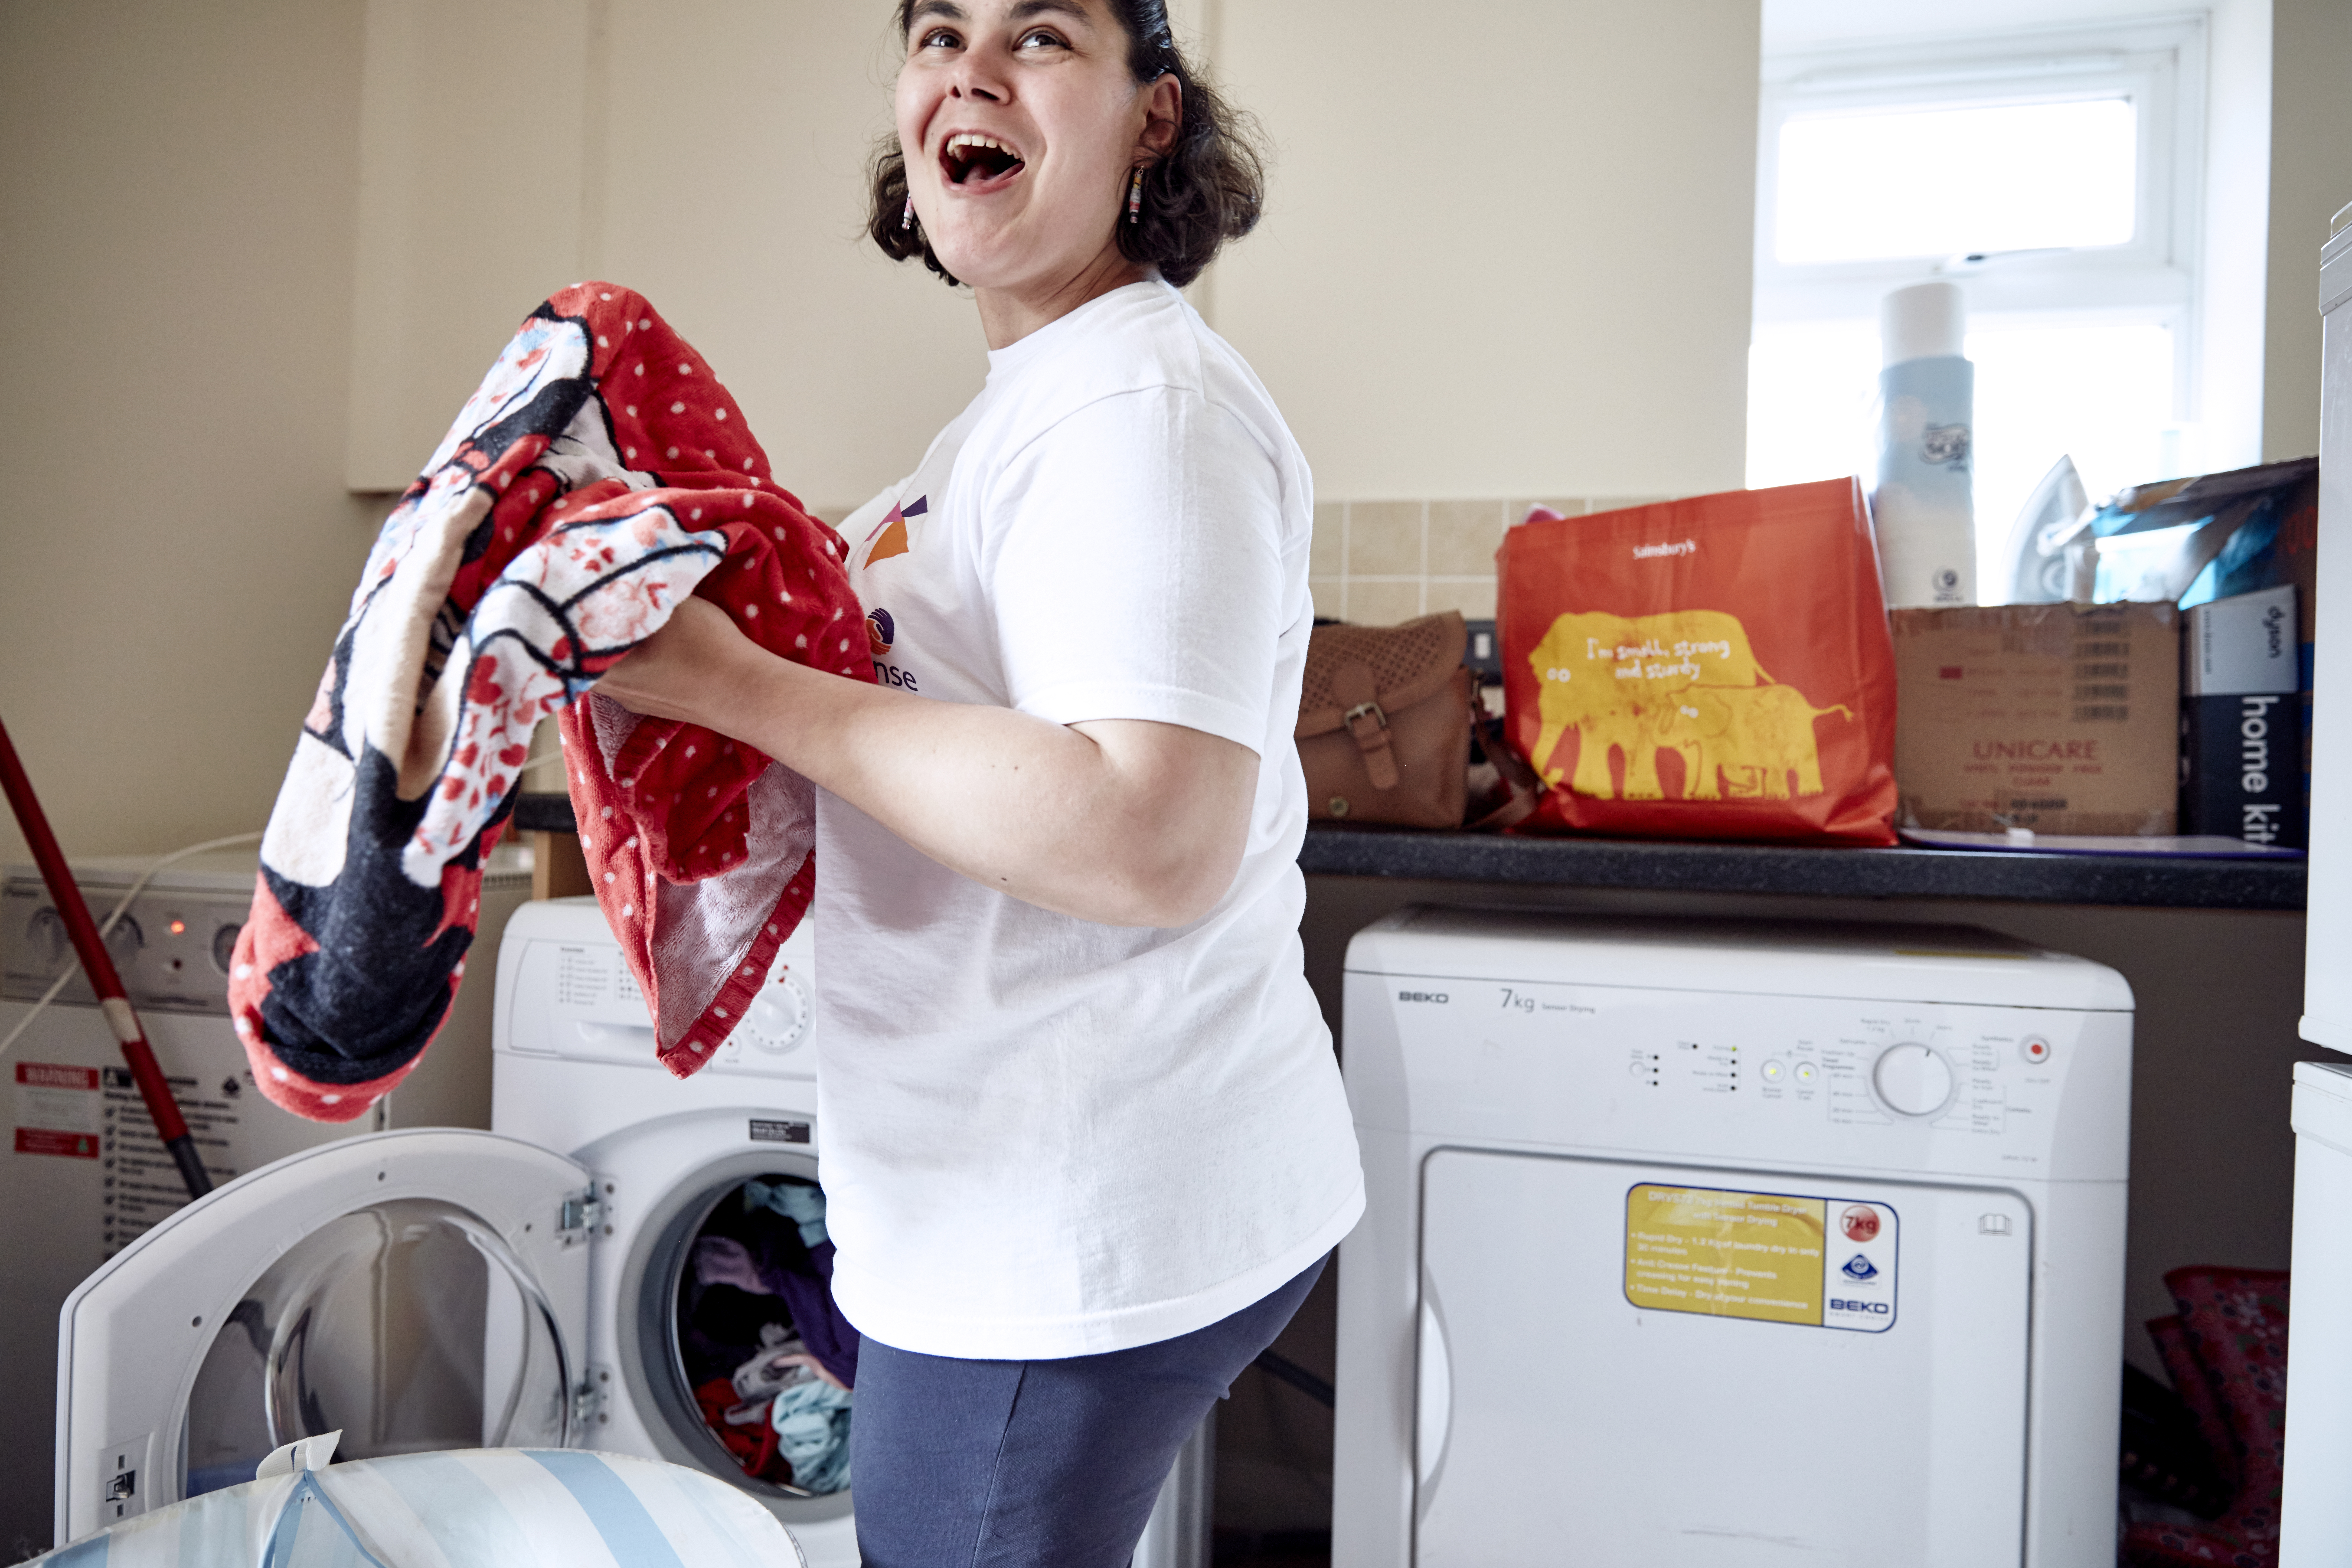 A woman with dark curly hair puts laundry in the washing machine while laughing.